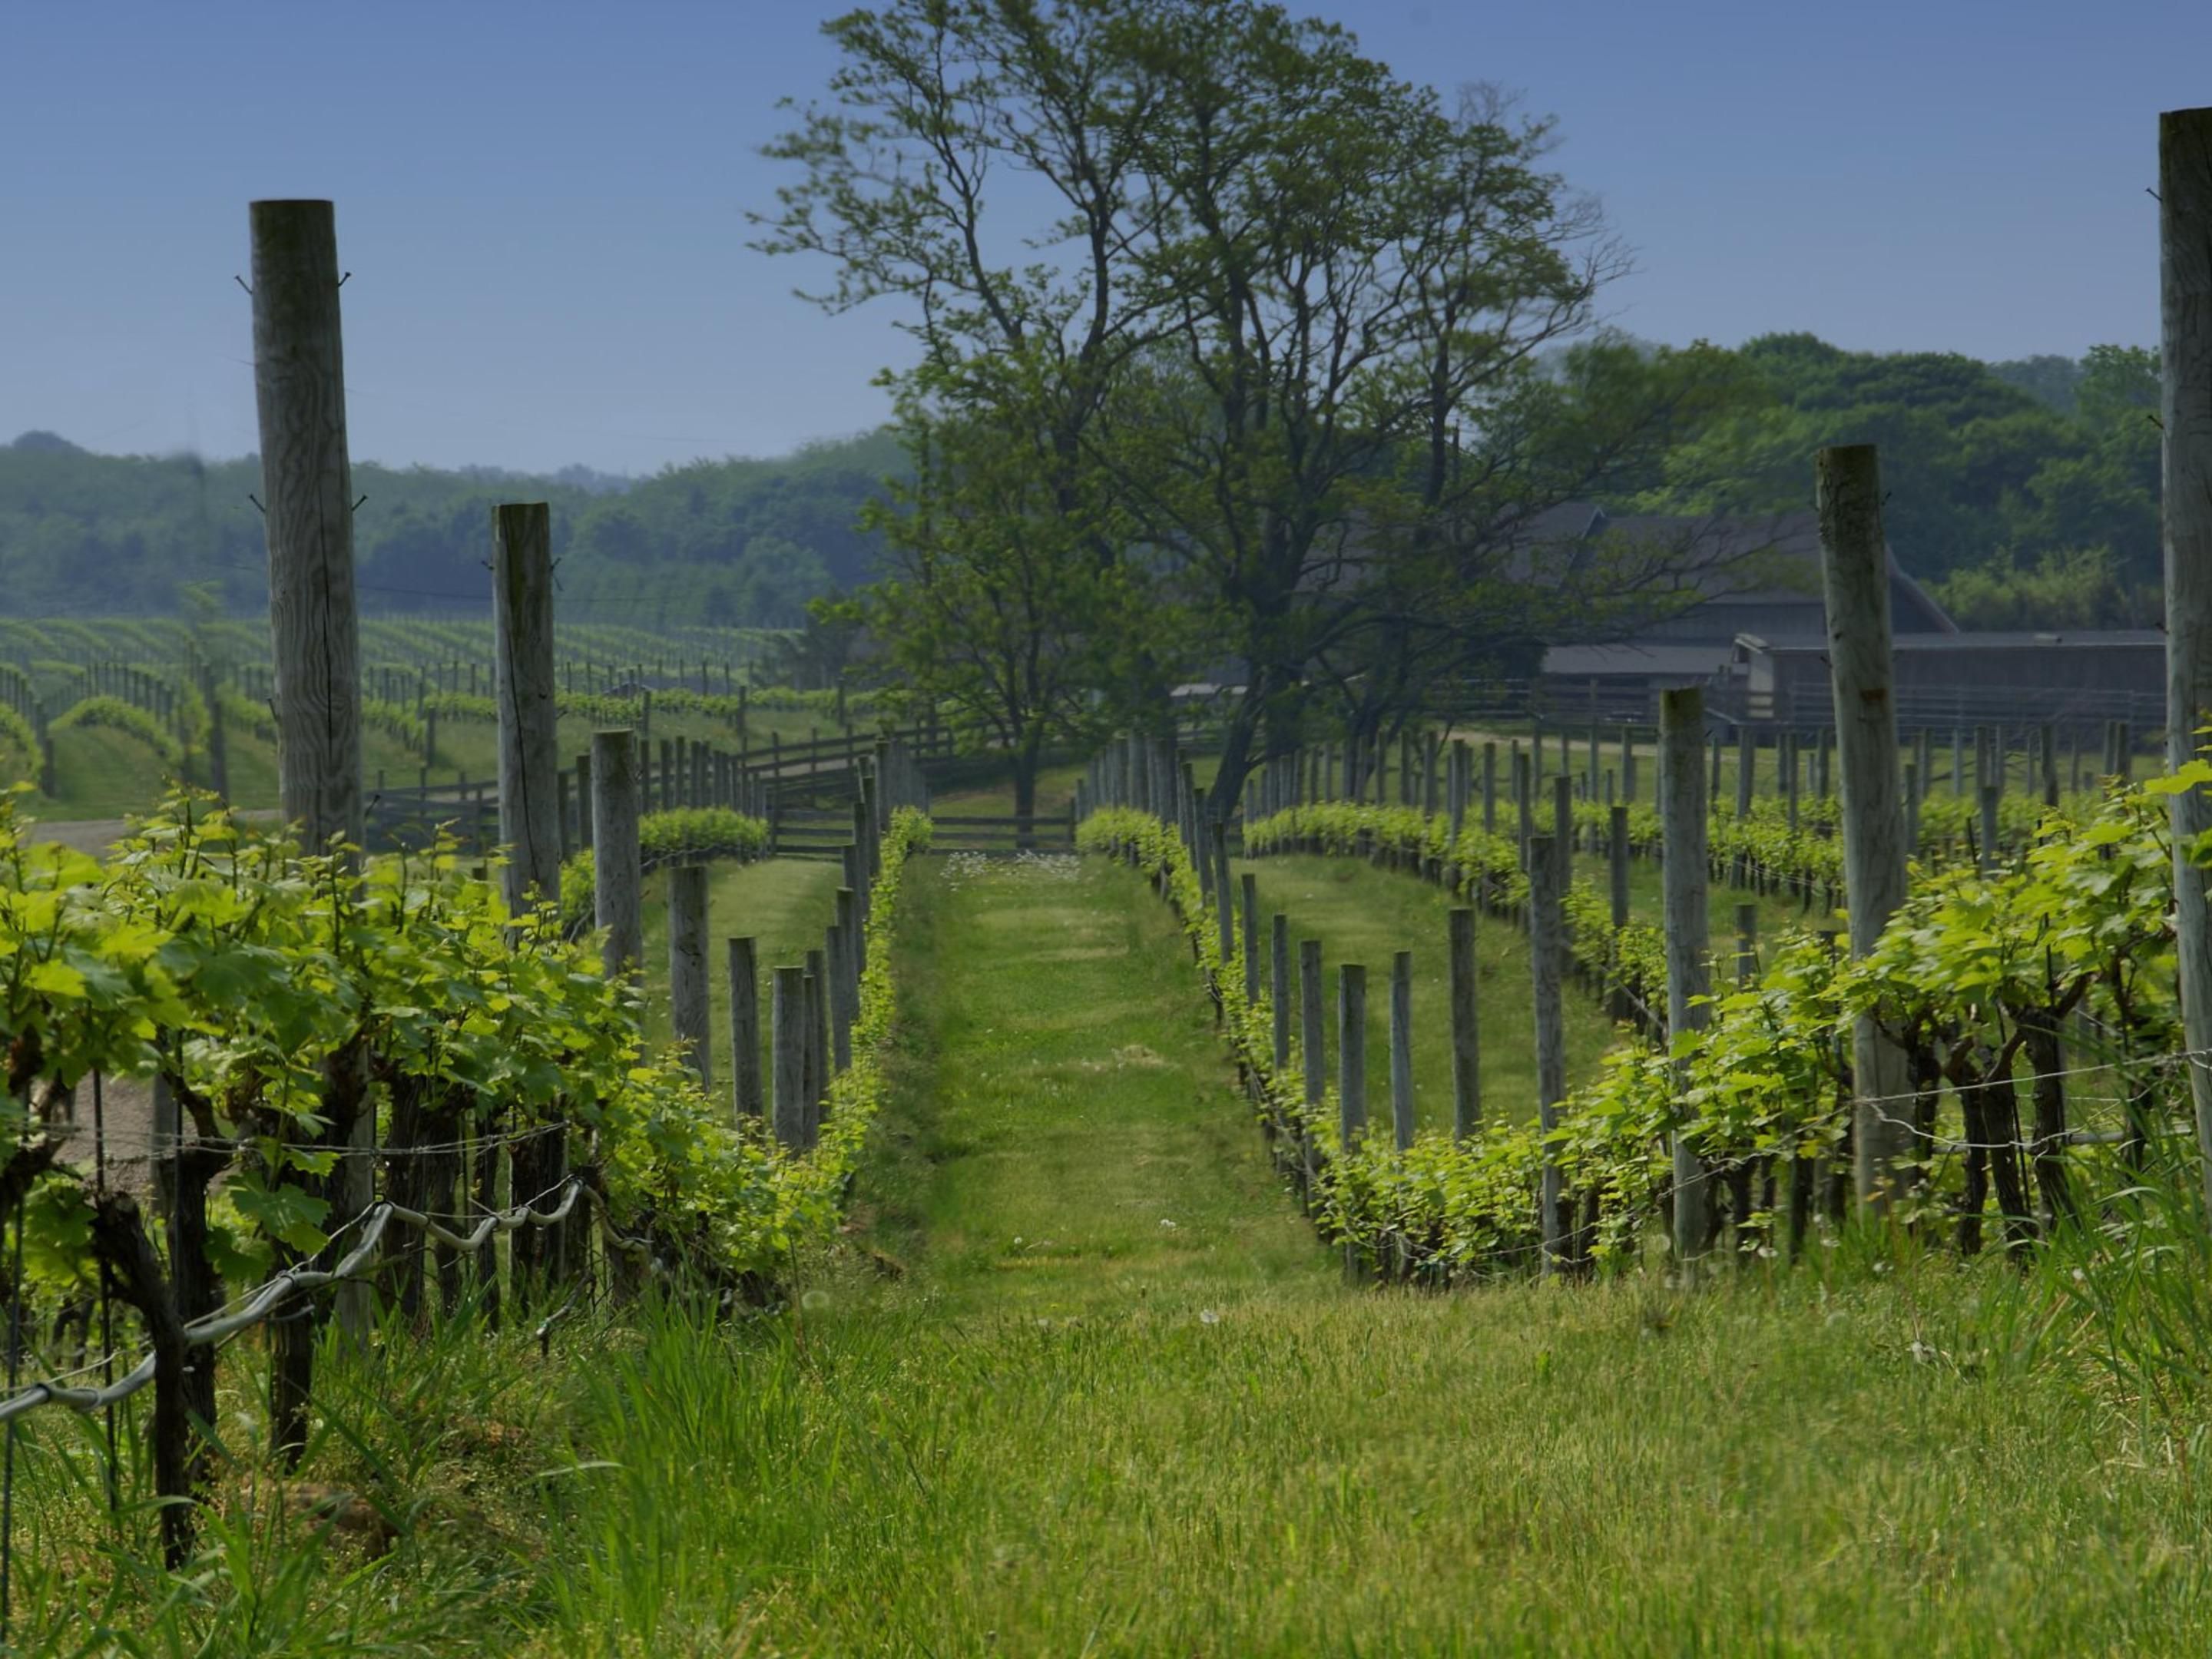 The heart of Long Island's Wine Country is located just 30 minutes from the hotel. Spend the day meandering through the countryside on your own, or book one of the numerous guided tours available. Our knowledgeable front desk can assist with any questions you have. 